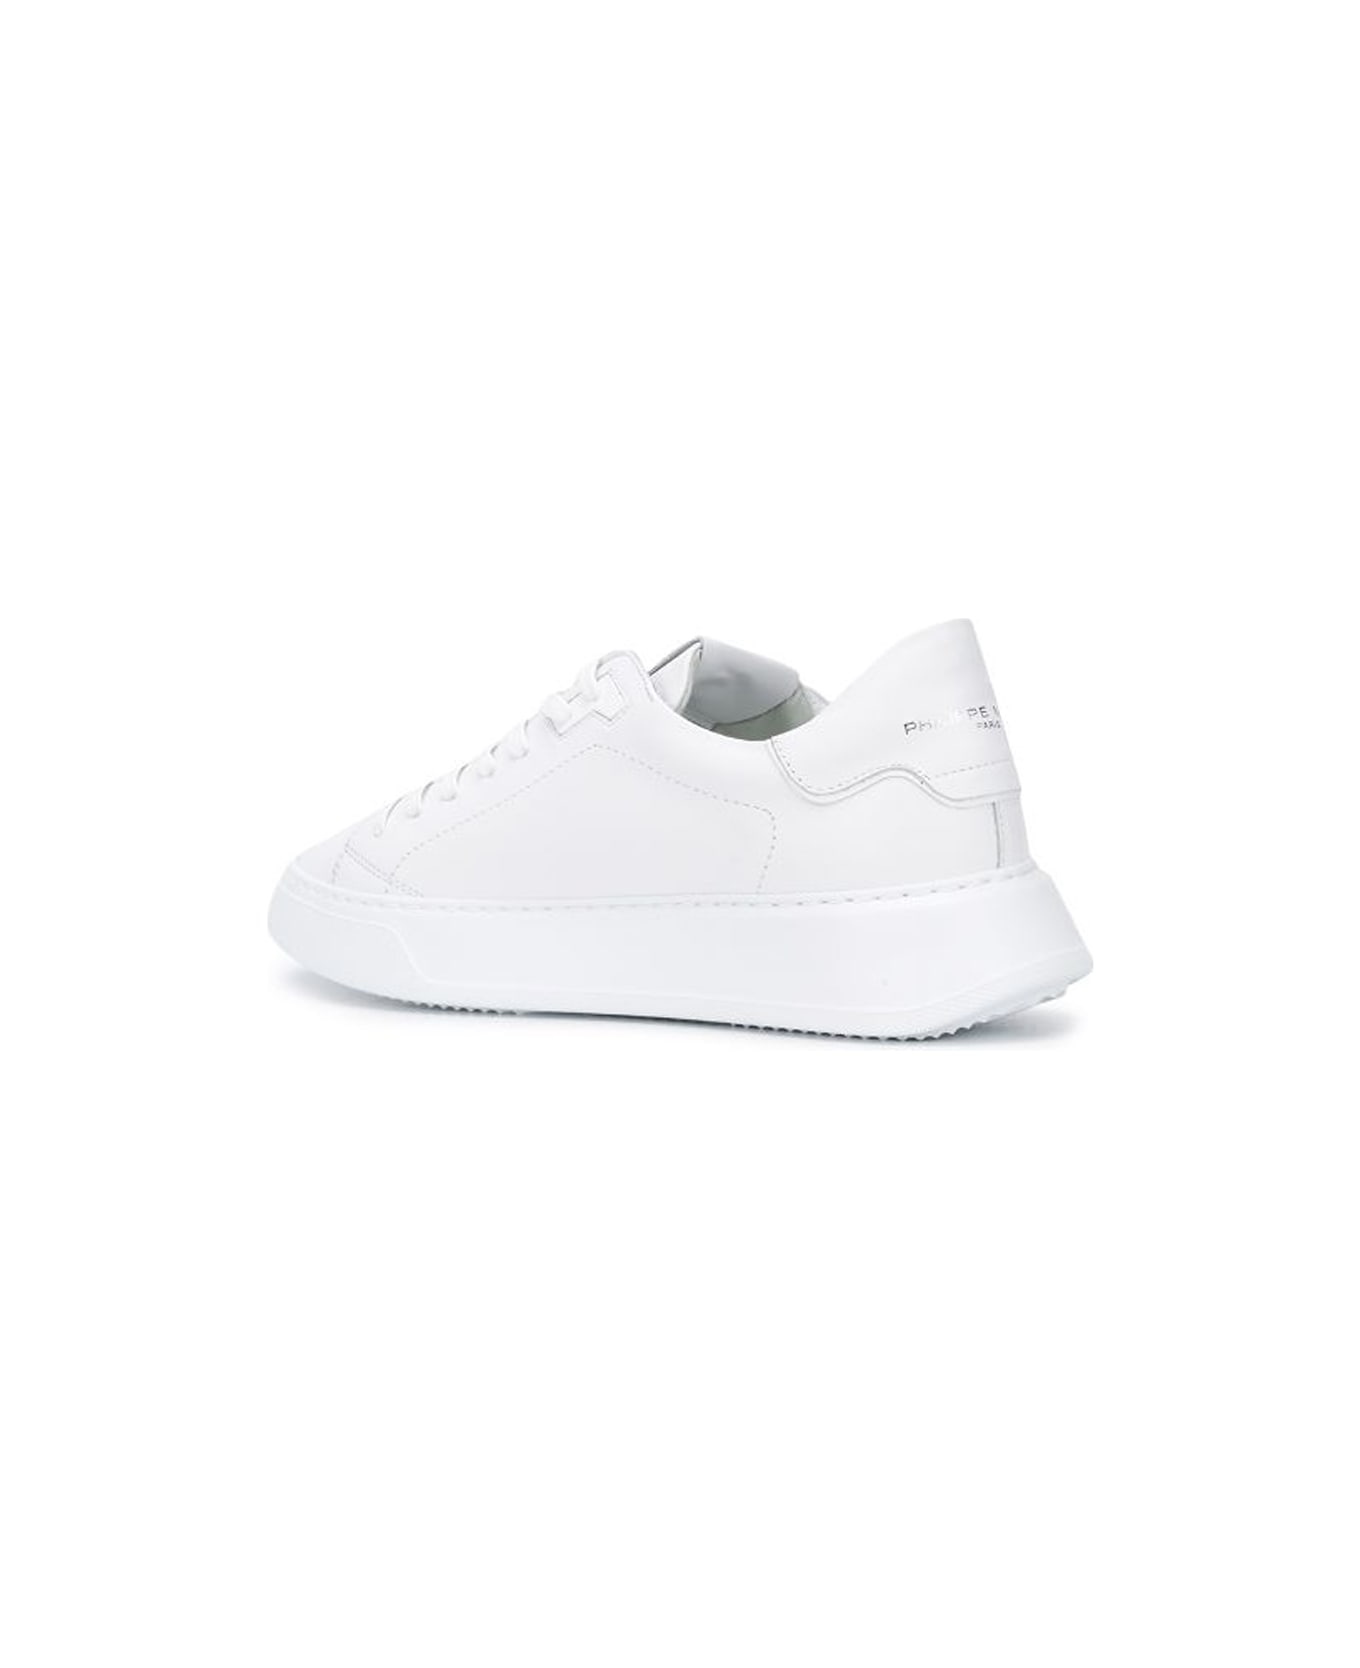 Philippe Model Temple Low Sneakers - Veau Blanc